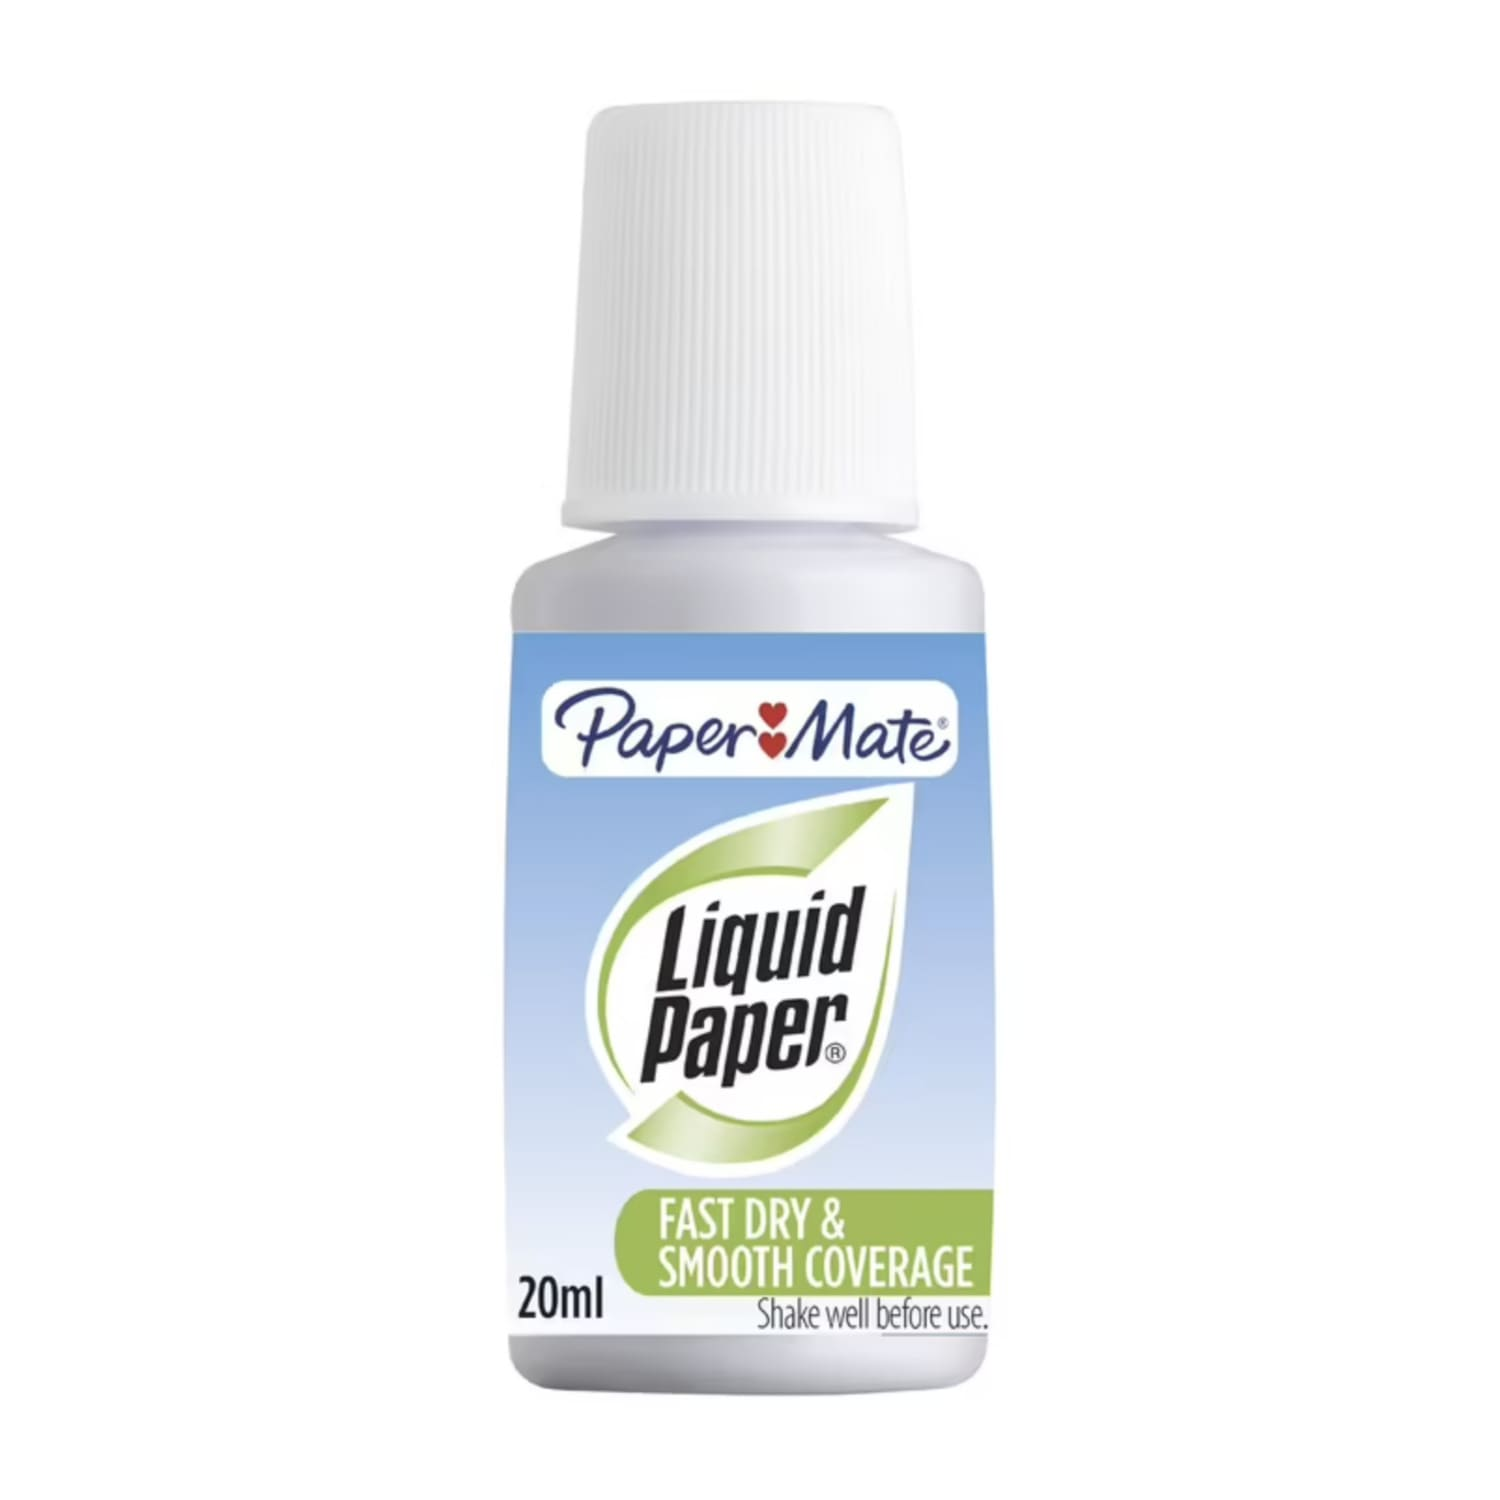 Paper Mate Liquid Paper - white correction fluid - fast drying for smooth  coverage.